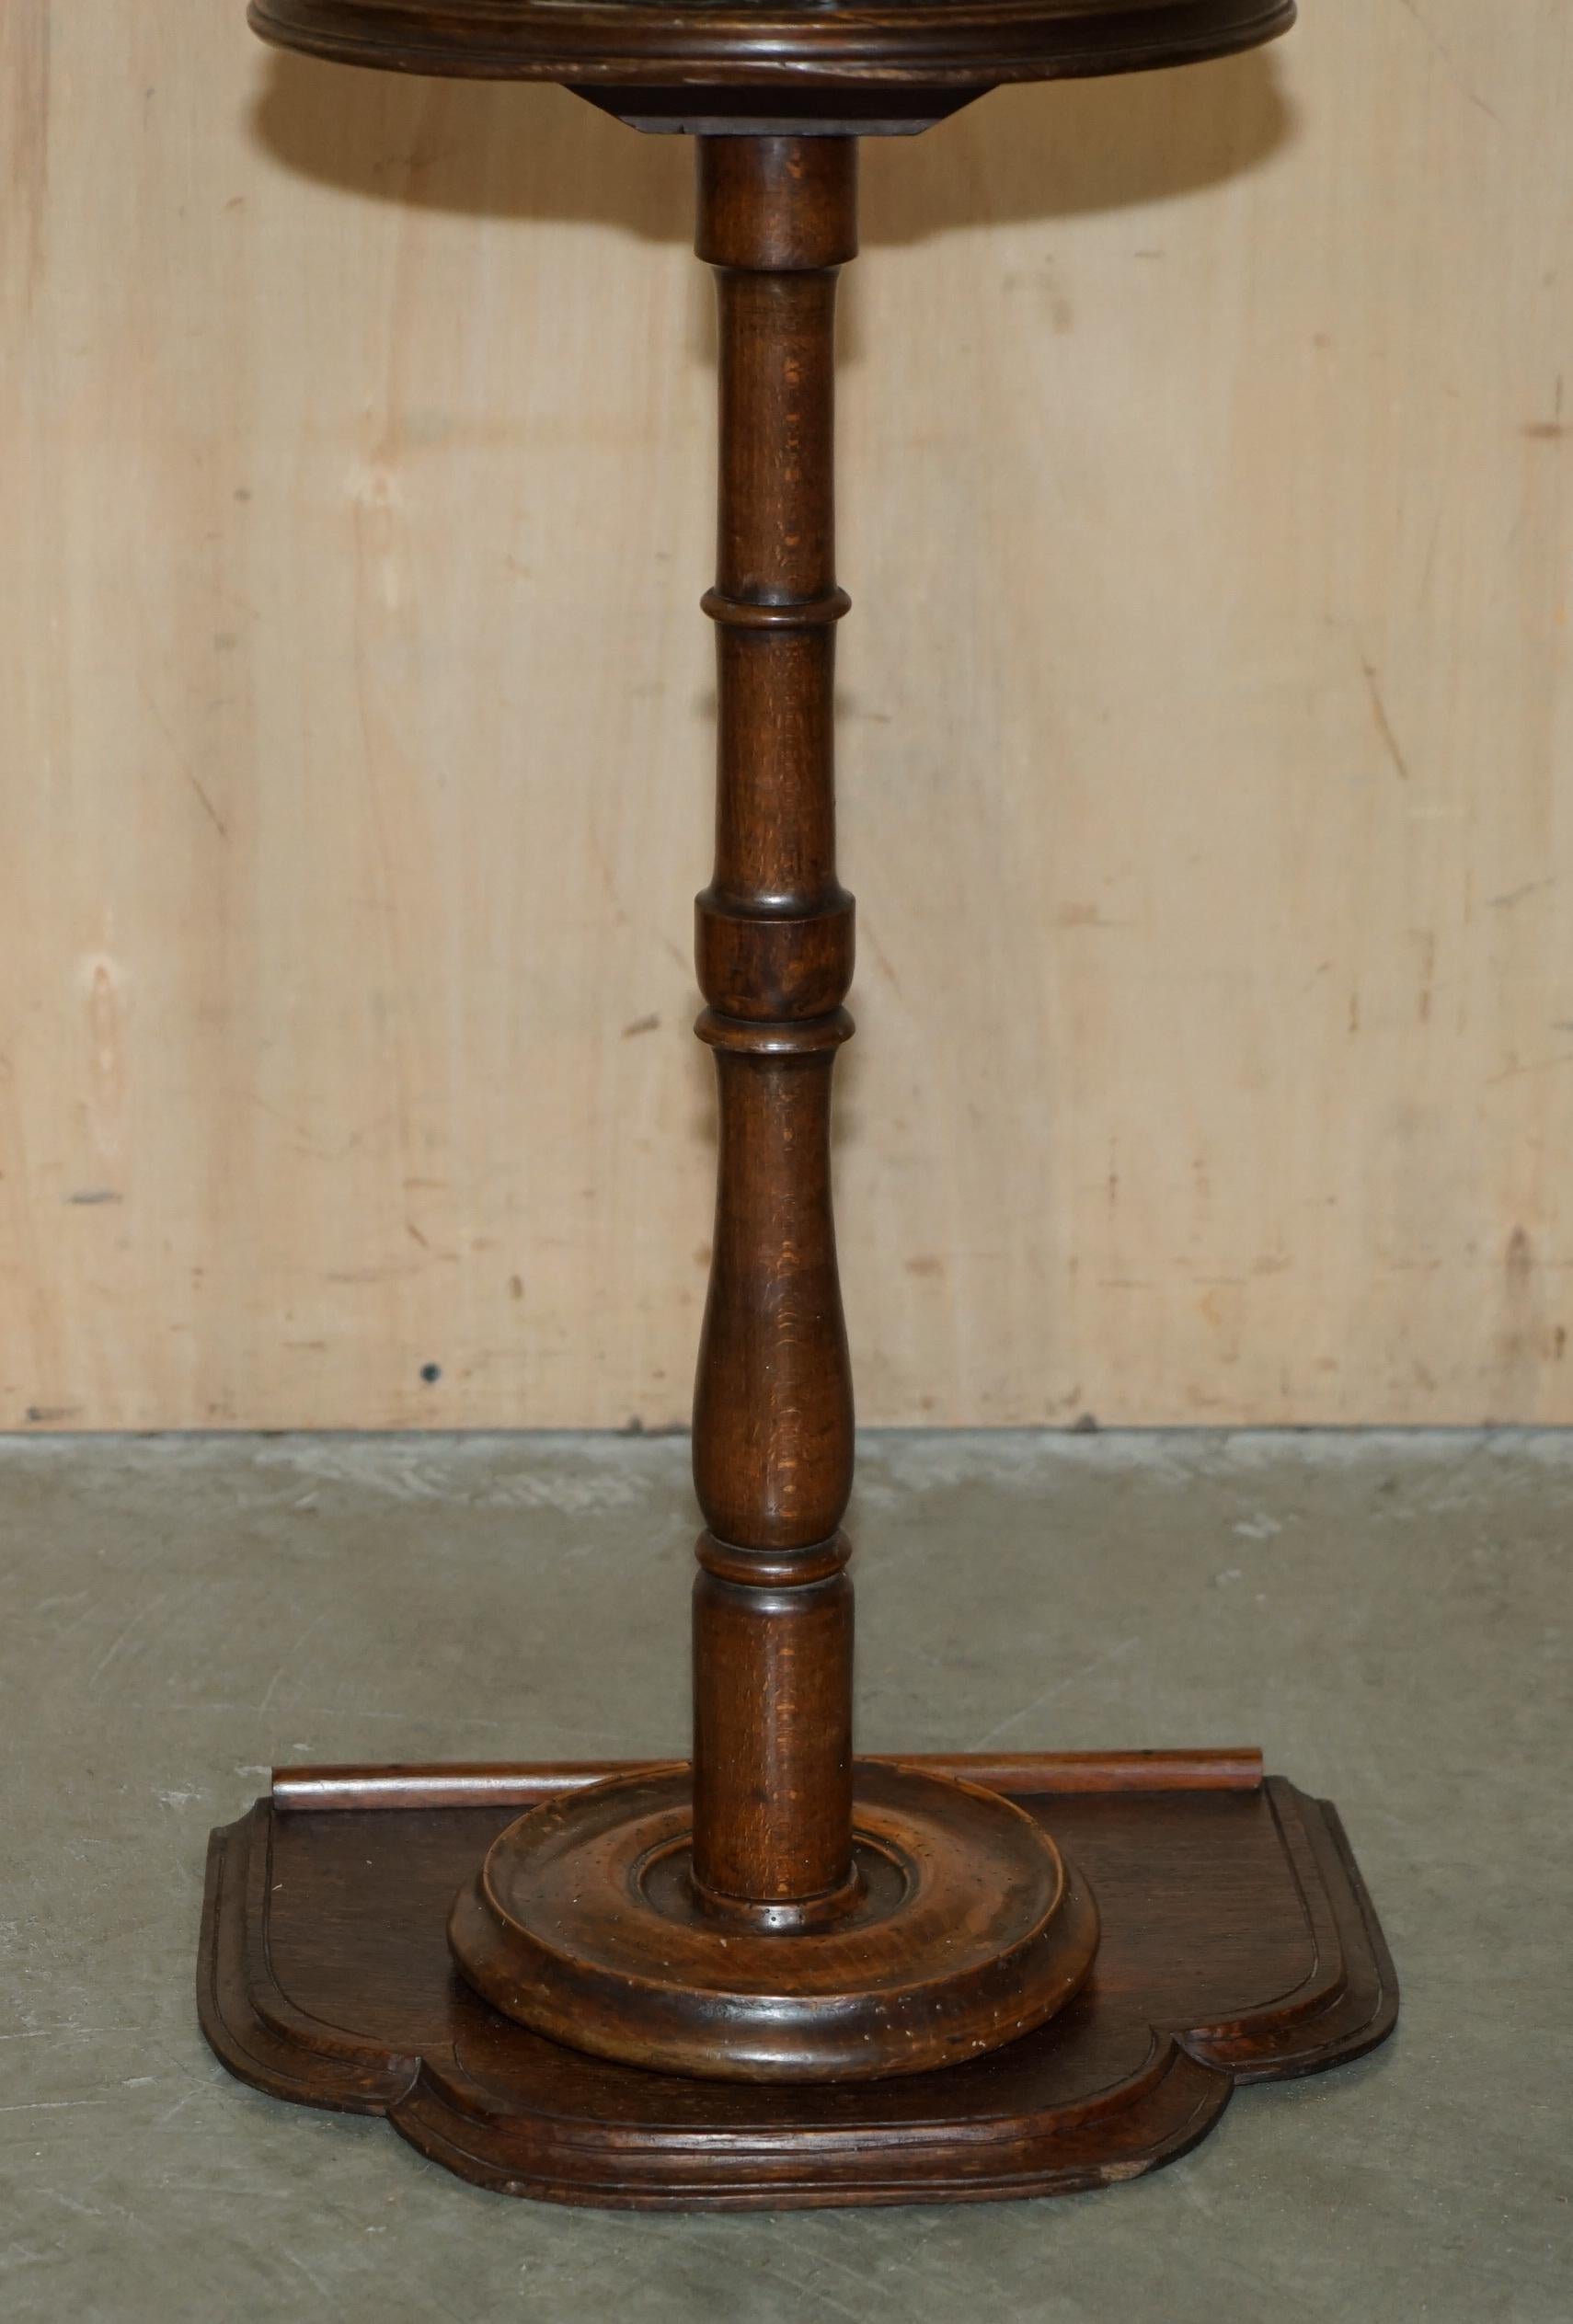 ANTIQUE ViCTORIAN SMOKERS SIDE TABLE DEPICTING CASTLES FOR PIPES TOBACCO CIGARS For Sale 3